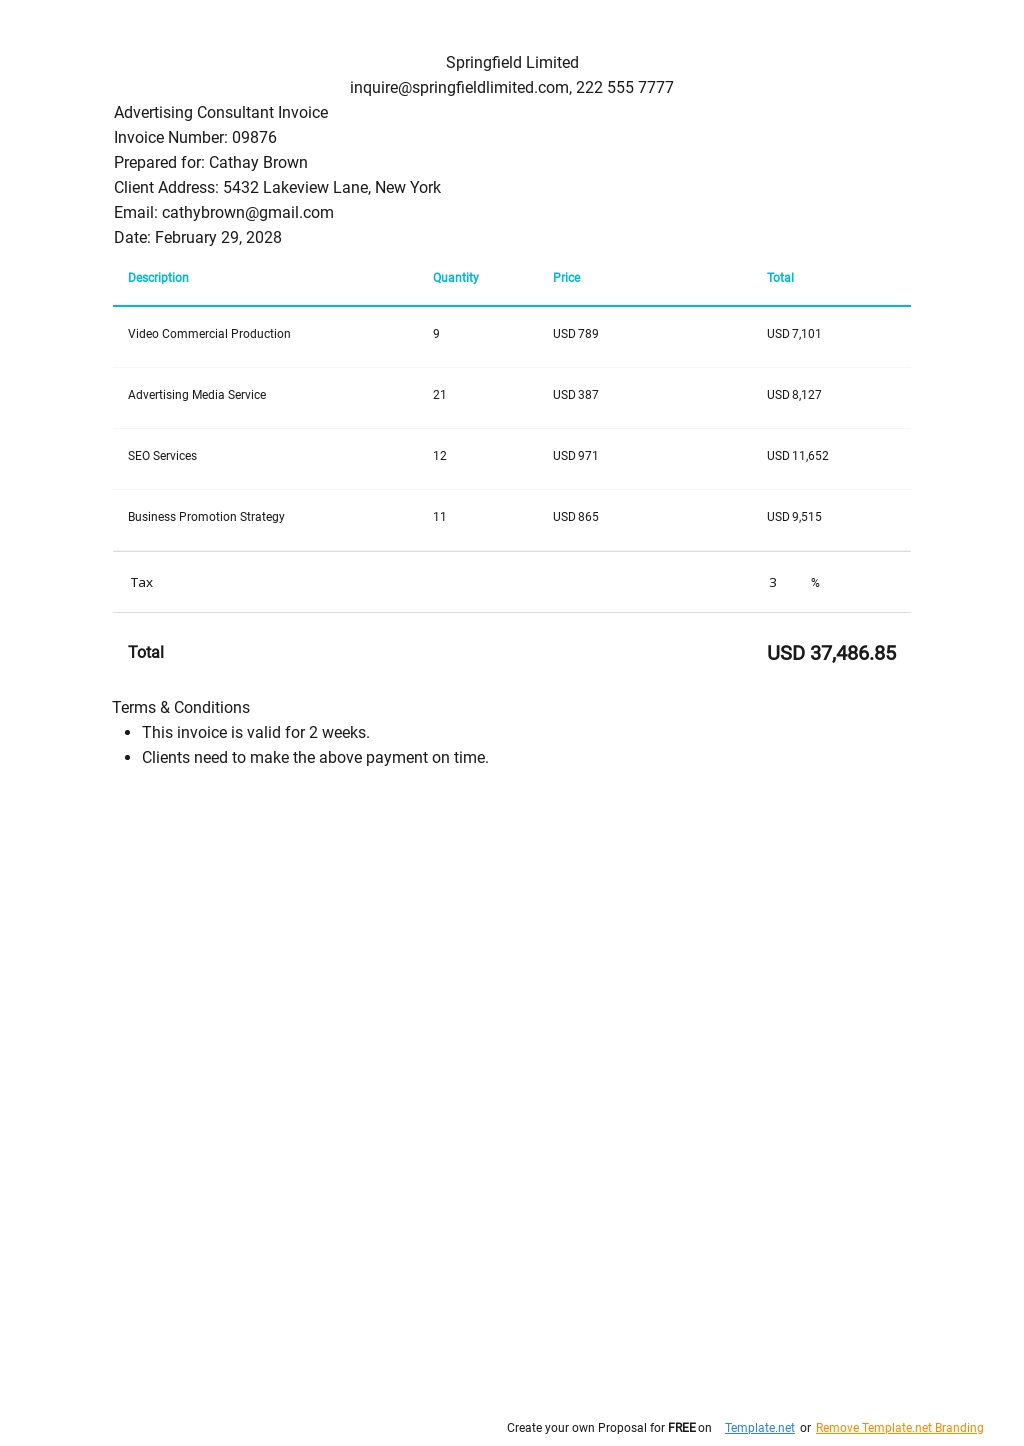 Advertising Consultant Invoice Template - Google Docs, Google Sheets, Excel, Word